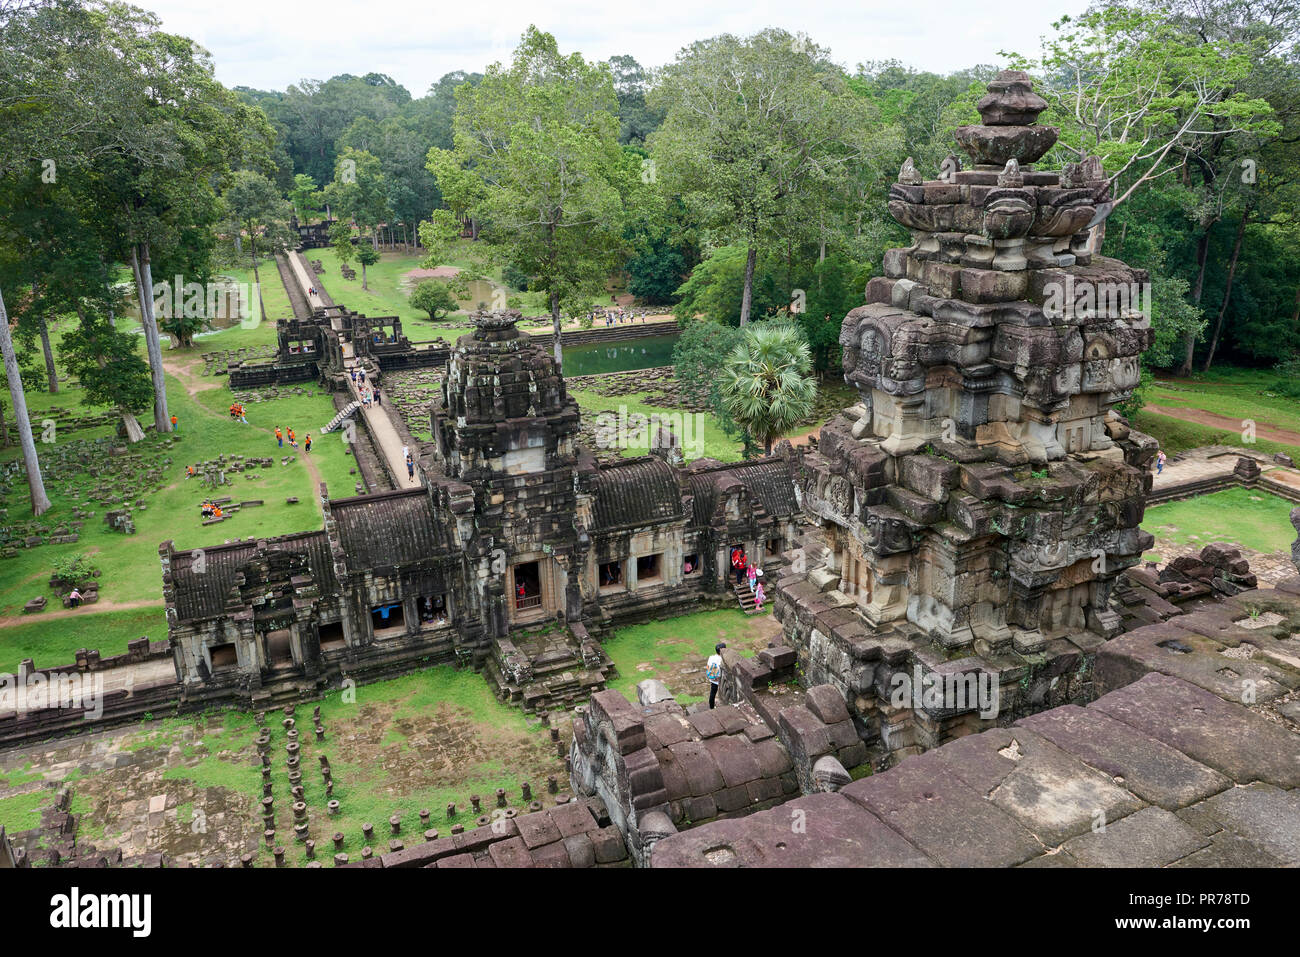 Baphuon Temple ruins in Angkor Wat. The Angkor Wat complex, Built during the Khmer Empire age, located in Siem Reap, Cambodia, is the largest religiou Stock Photo